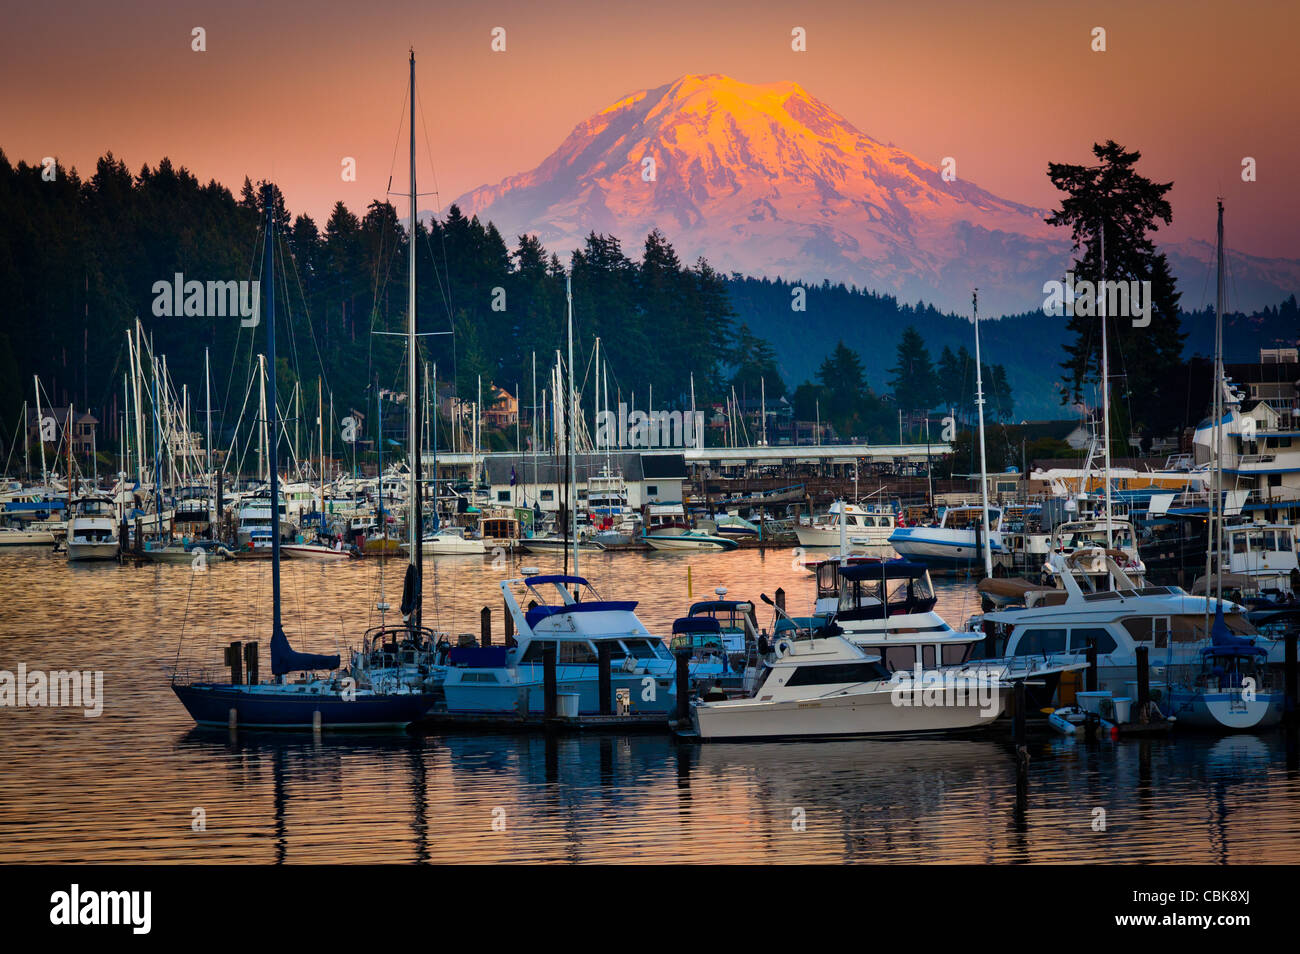 Evening at the harbor in Gig Harbor, WA. Mount Rainier looming in the background. Stock Photo